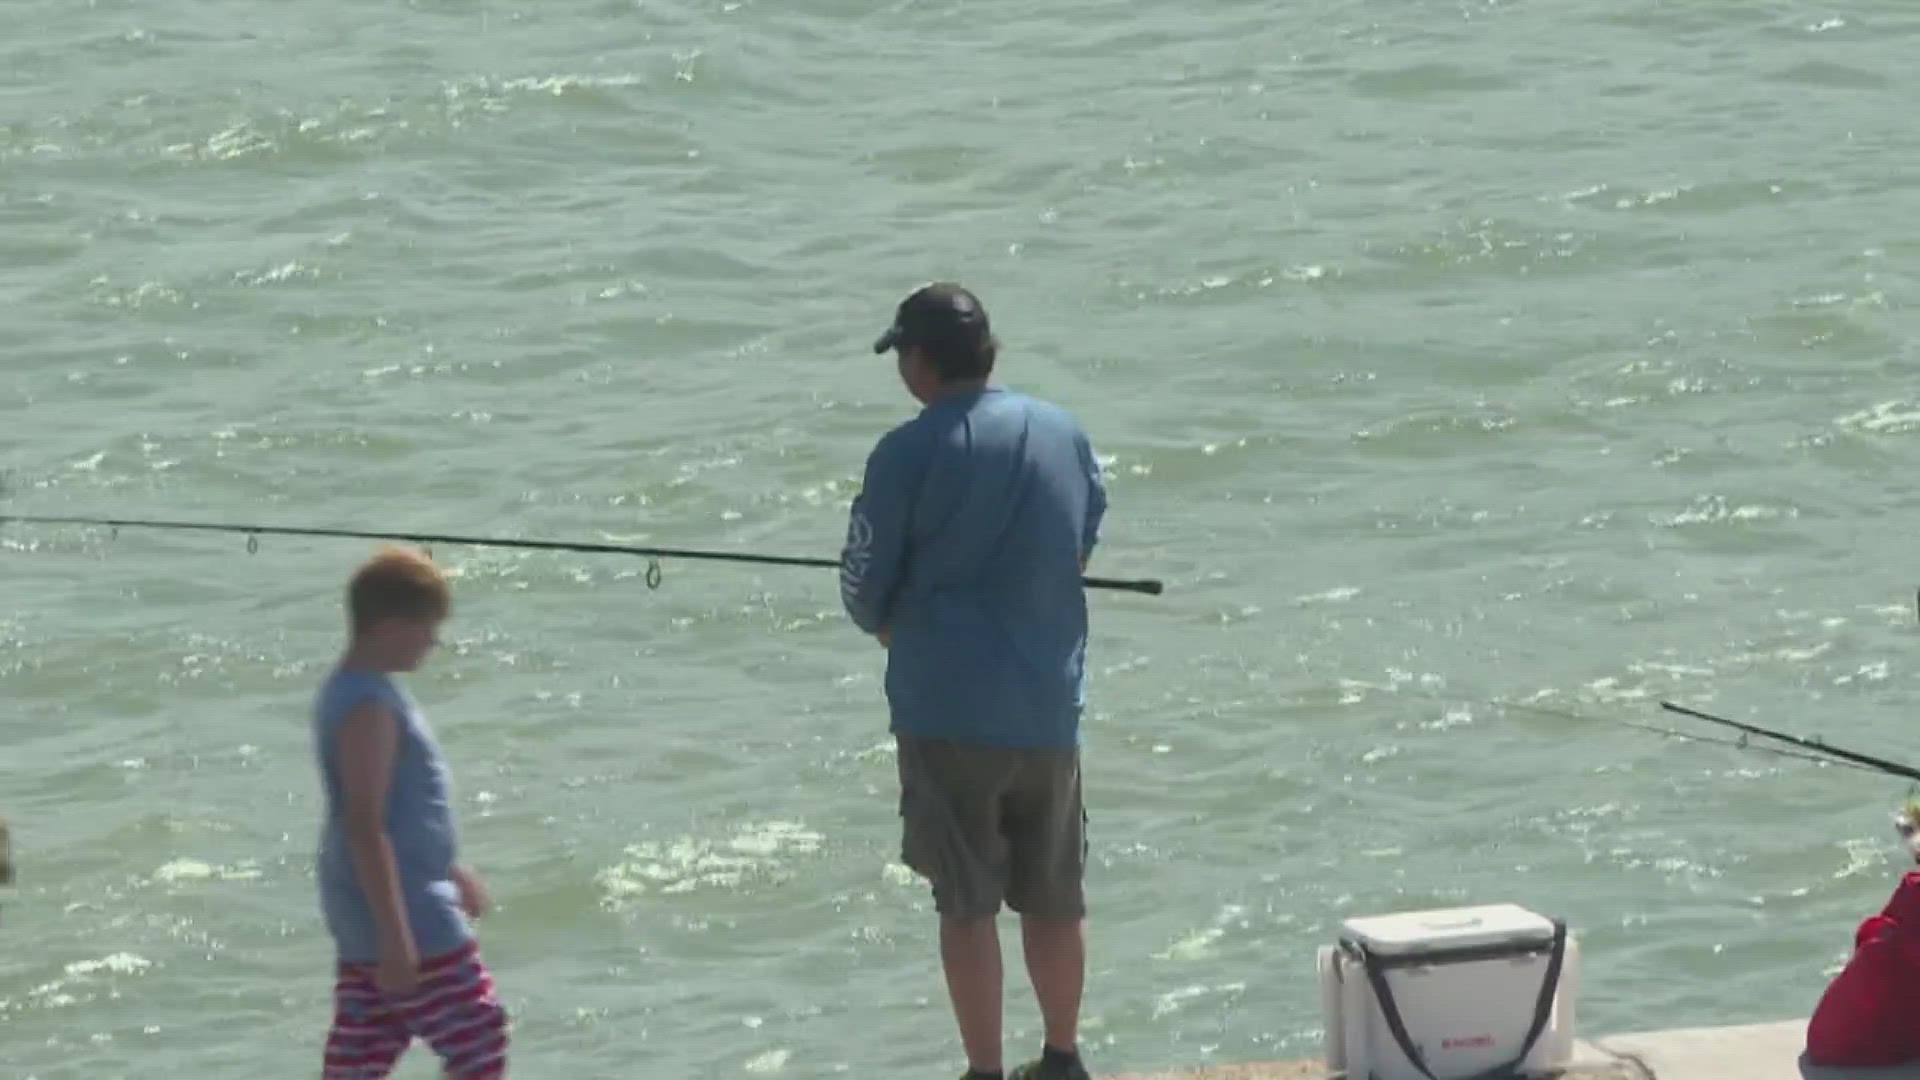 Once a year, Texas Parks and Wildlife allows everyone to fish in any public body of water without a fishing license. It begins at midnight and runs until noon.